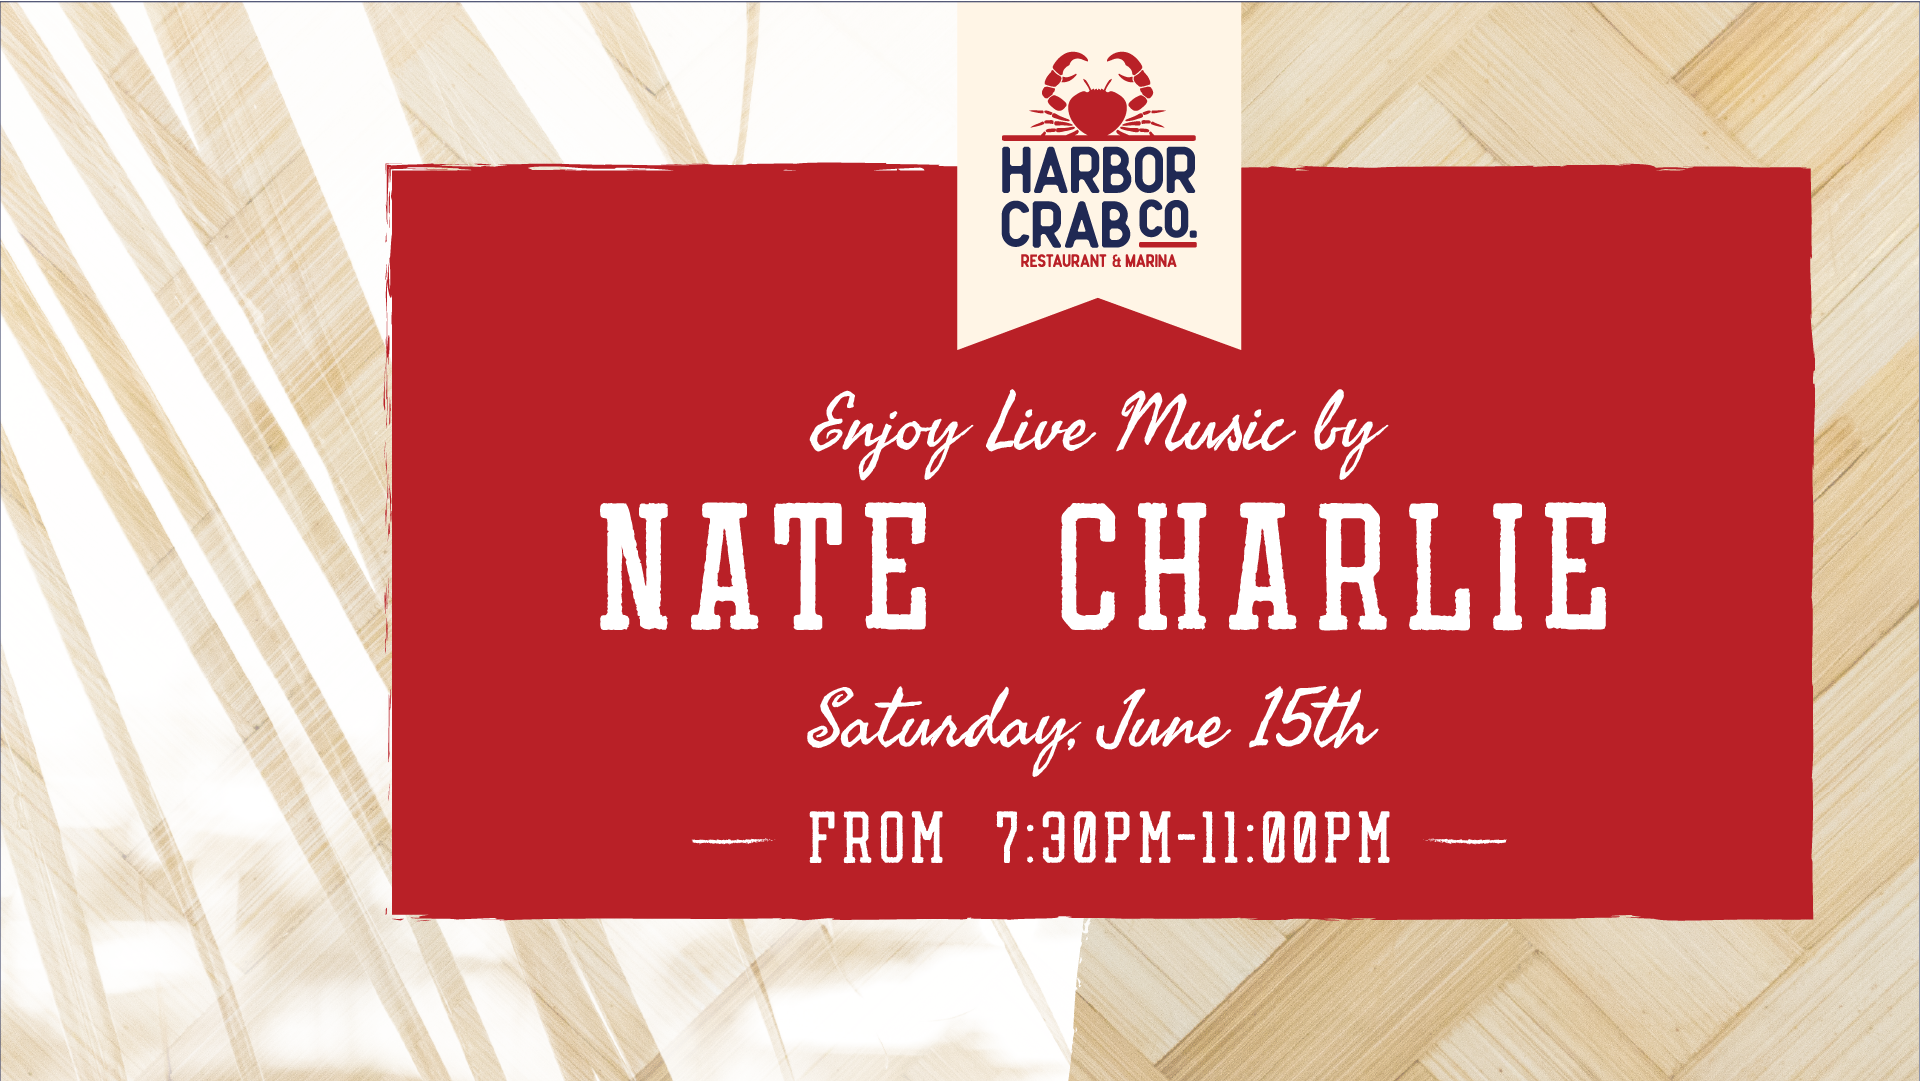 Live music by Nate Charlie at Harbor Crab on June 15th from 7:30pm-11pm.